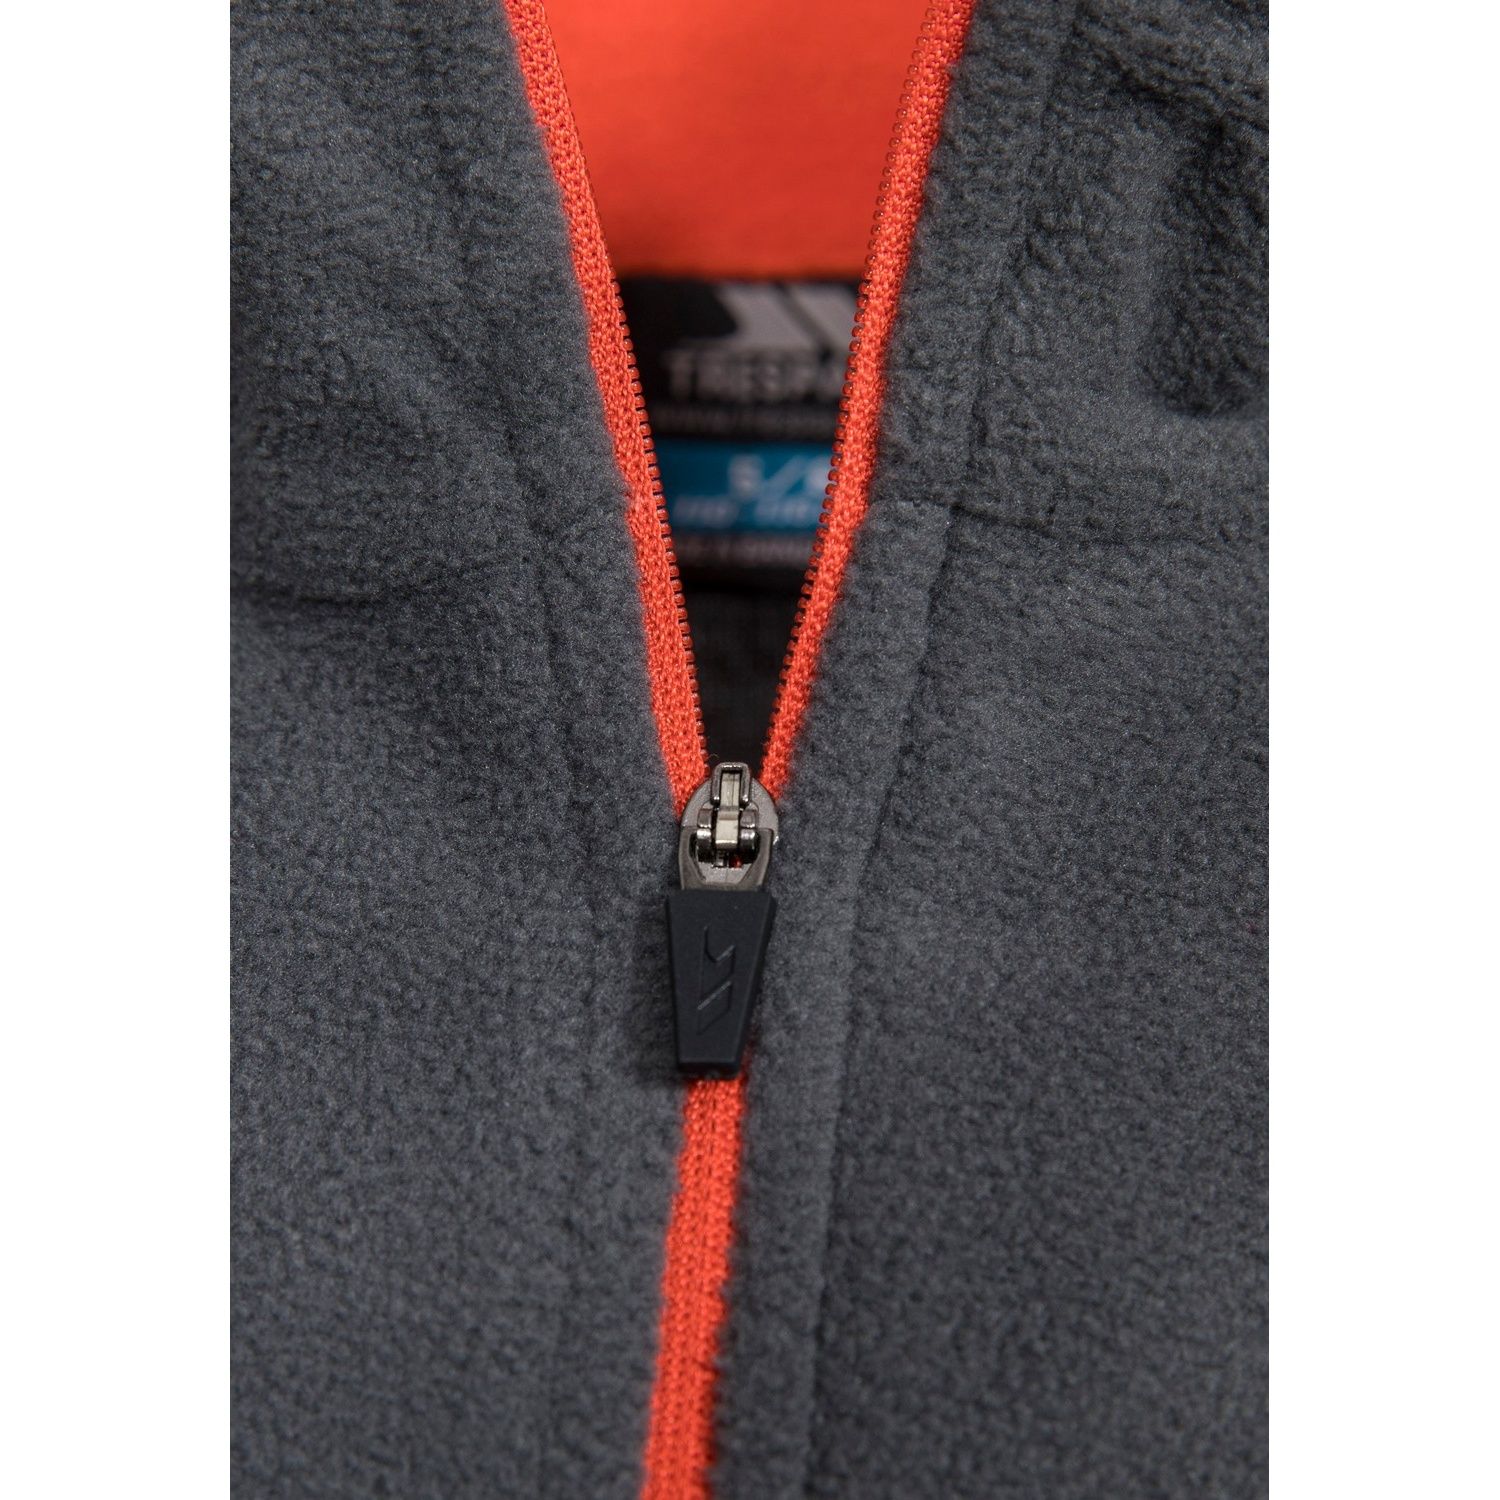 Airtrap. 1/2 Zip in Contrast Colour. Contrast Binding on Cuffs. Contrast Facing on Inner Collar. 100% Polyester Microfleece. Trespass Childrens Chest Sizing (approx): 2/3 Years - 21in/53cm, 3/4 Years - 22in/56cm, 5/6 Years - 24in/61cm, 7/8 Years - 26in/66cm, 9/10 Years - 28in/71cm, 11/12 Years - 31in/79cm.